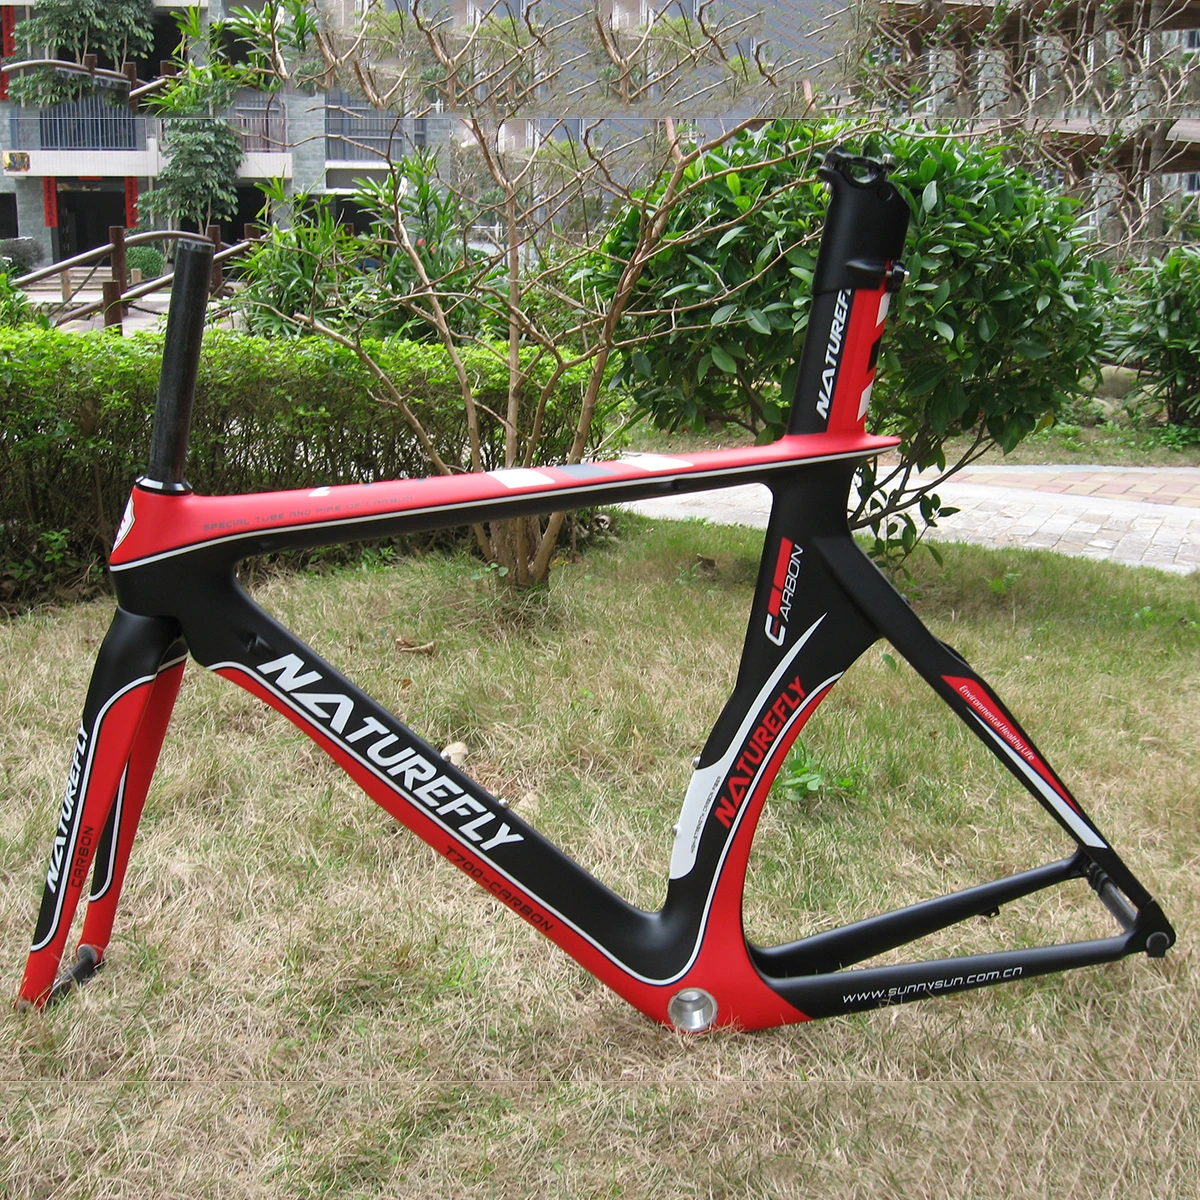 

Naturefly Red Carbon Time Trial Bicycle Triathlon Cycle Frame TT Road Bike Frameset 700c Free Shipping